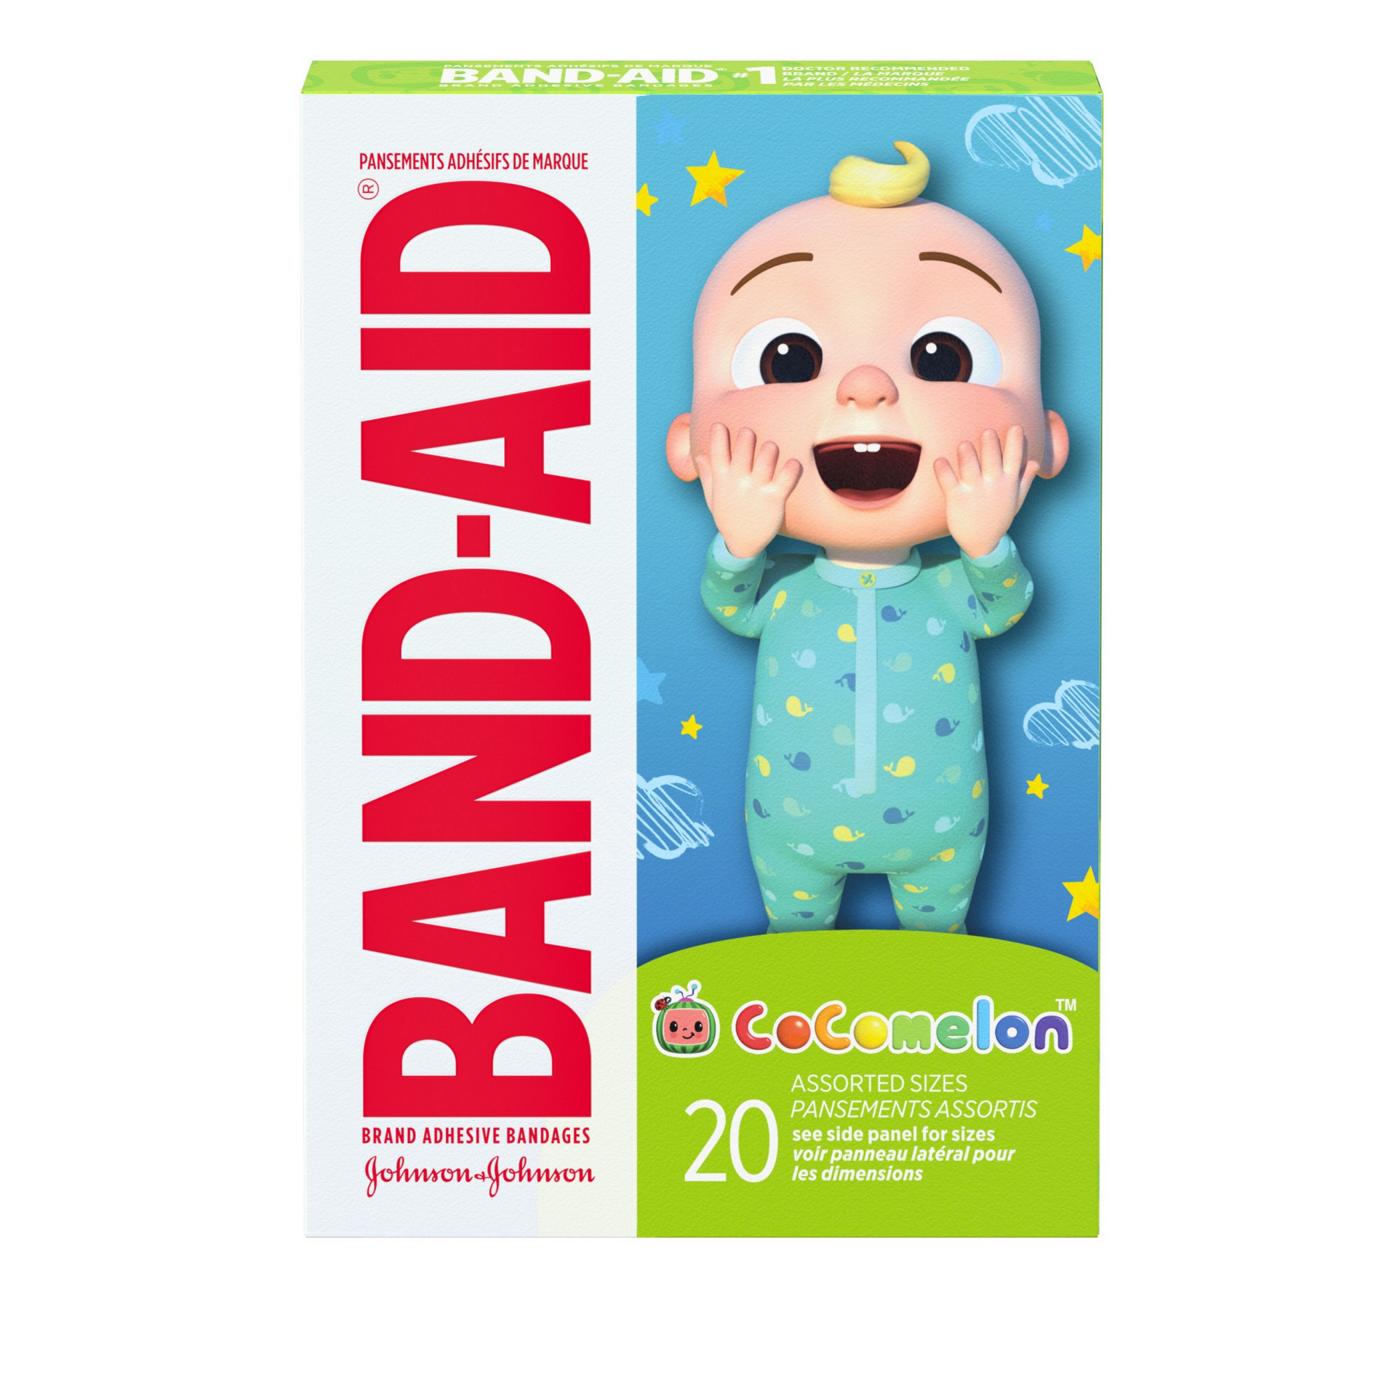 Band-Aid Adhesive Bandages Featuring Cocomelon; image 1 of 3